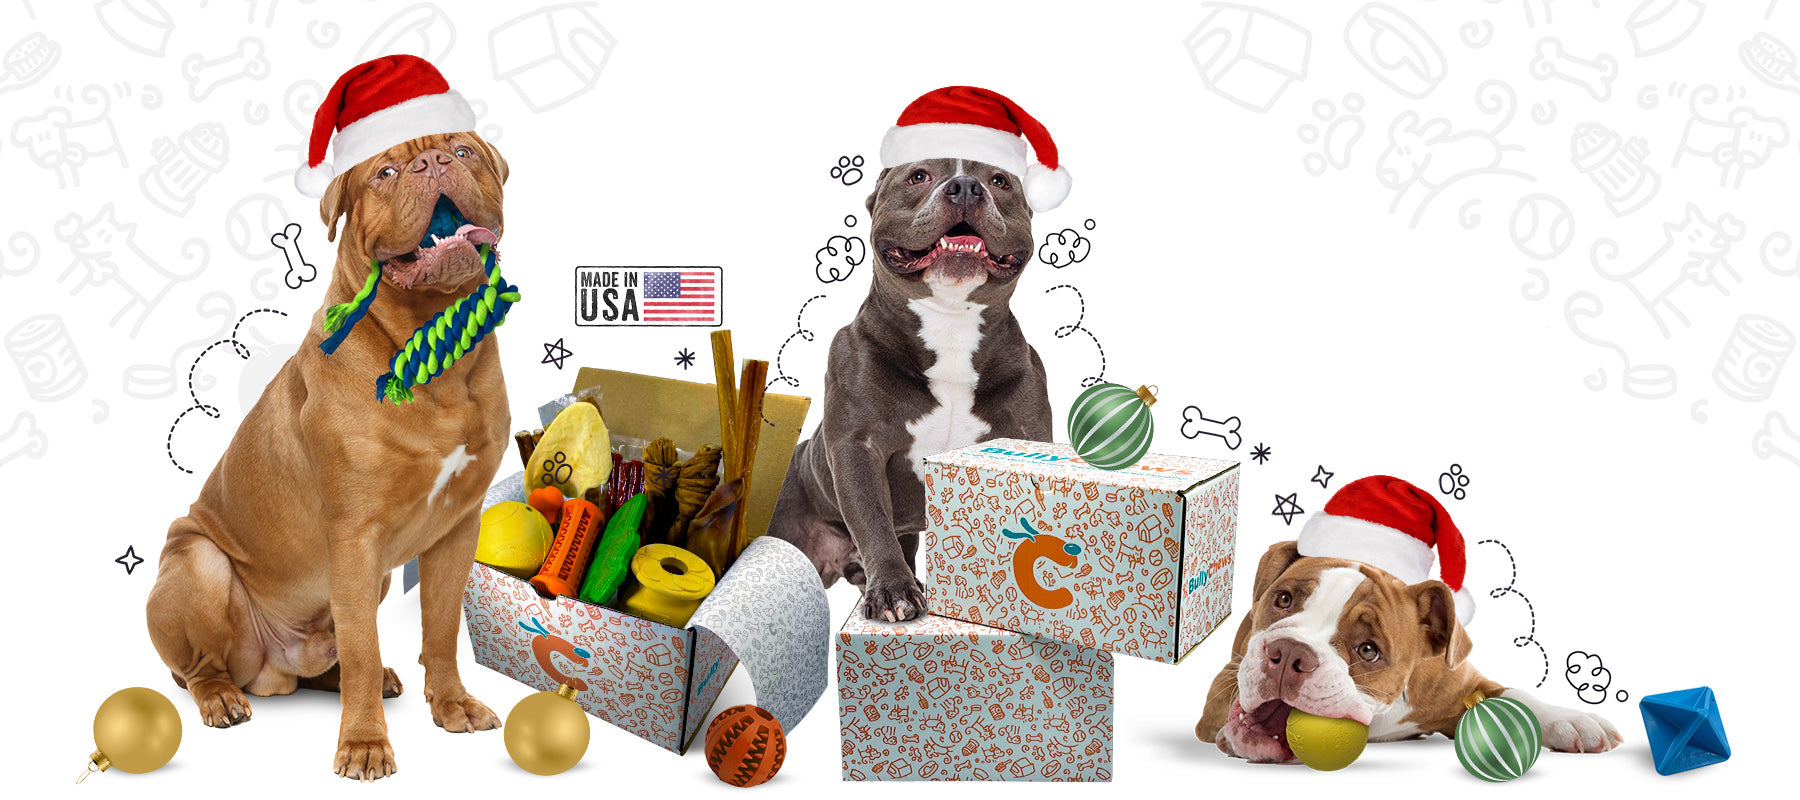 Bullychews fron banner 3 dogs with christmas hats on